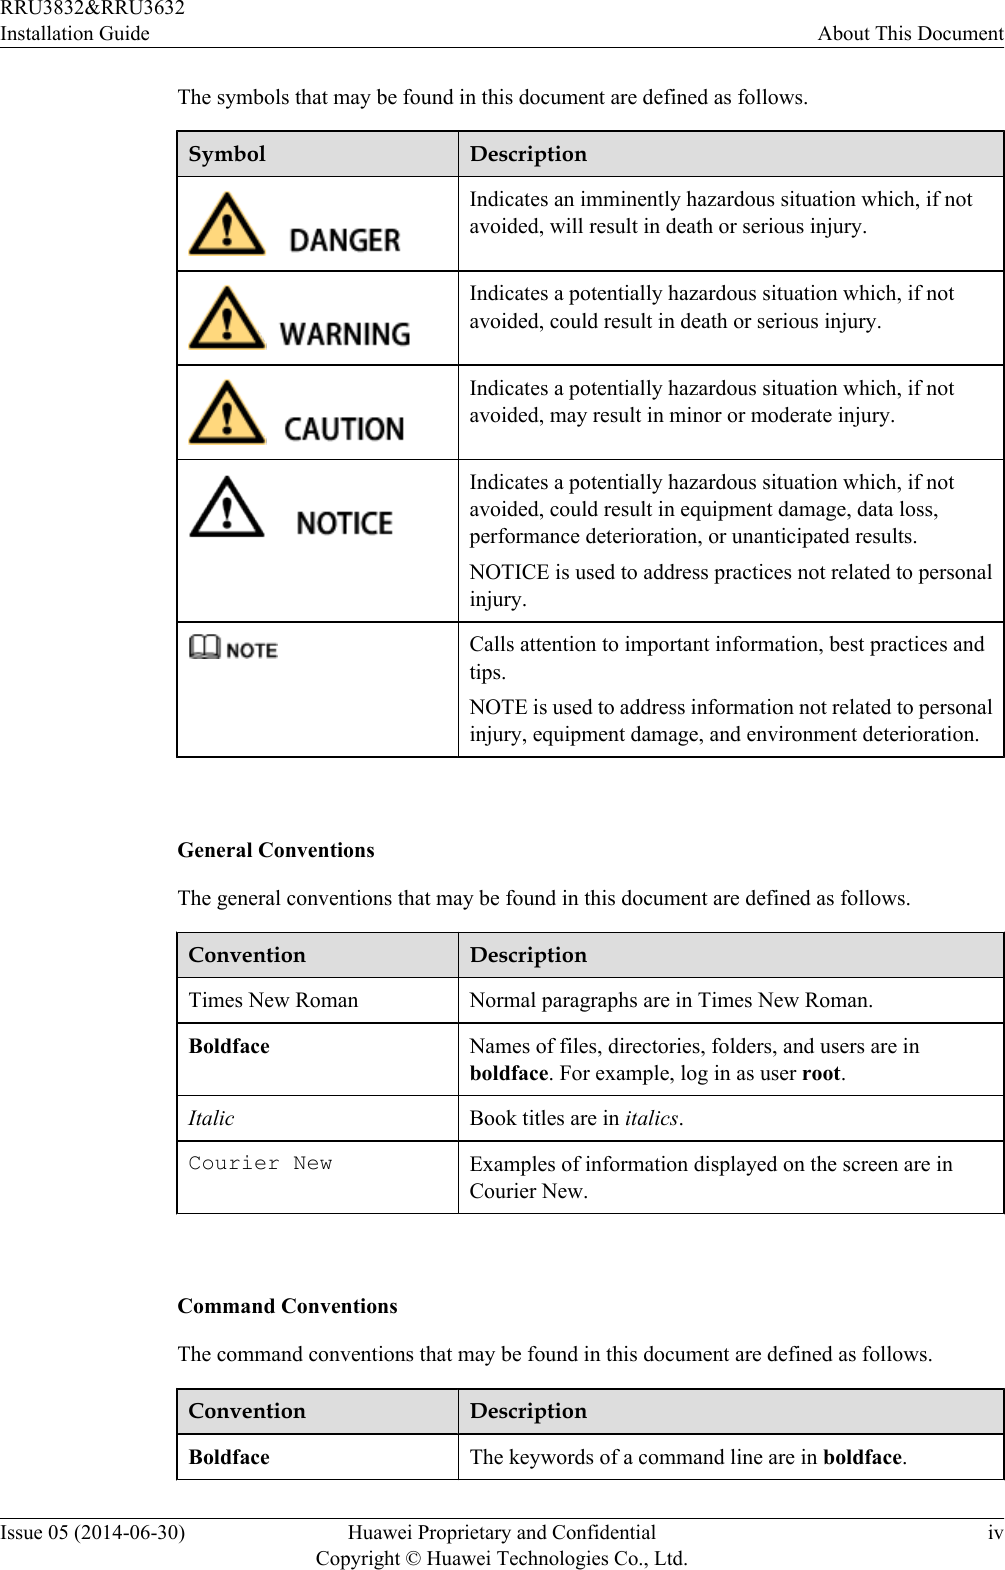 The symbols that may be found in this document are defined as follows.Symbol DescriptionIndicates an imminently hazardous situation which, if notavoided, will result in death or serious injury.Indicates a potentially hazardous situation which, if notavoided, could result in death or serious injury.Indicates a potentially hazardous situation which, if notavoided, may result in minor or moderate injury.Indicates a potentially hazardous situation which, if notavoided, could result in equipment damage, data loss,performance deterioration, or unanticipated results.NOTICE is used to address practices not related to personalinjury.Calls attention to important information, best practices andtips.NOTE is used to address information not related to personalinjury, equipment damage, and environment deterioration. General ConventionsThe general conventions that may be found in this document are defined as follows.Convention DescriptionTimes New Roman Normal paragraphs are in Times New Roman.Boldface Names of files, directories, folders, and users are inboldface. For example, log in as user root.Italic Book titles are in italics.Courier New Examples of information displayed on the screen are inCourier New. Command ConventionsThe command conventions that may be found in this document are defined as follows.Convention DescriptionBoldface The keywords of a command line are in boldface.RRU3832&amp;RRU3632Installation Guide About This DocumentIssue 05 (2014-06-30) Huawei Proprietary and ConfidentialCopyright © Huawei Technologies Co., Ltd.iv